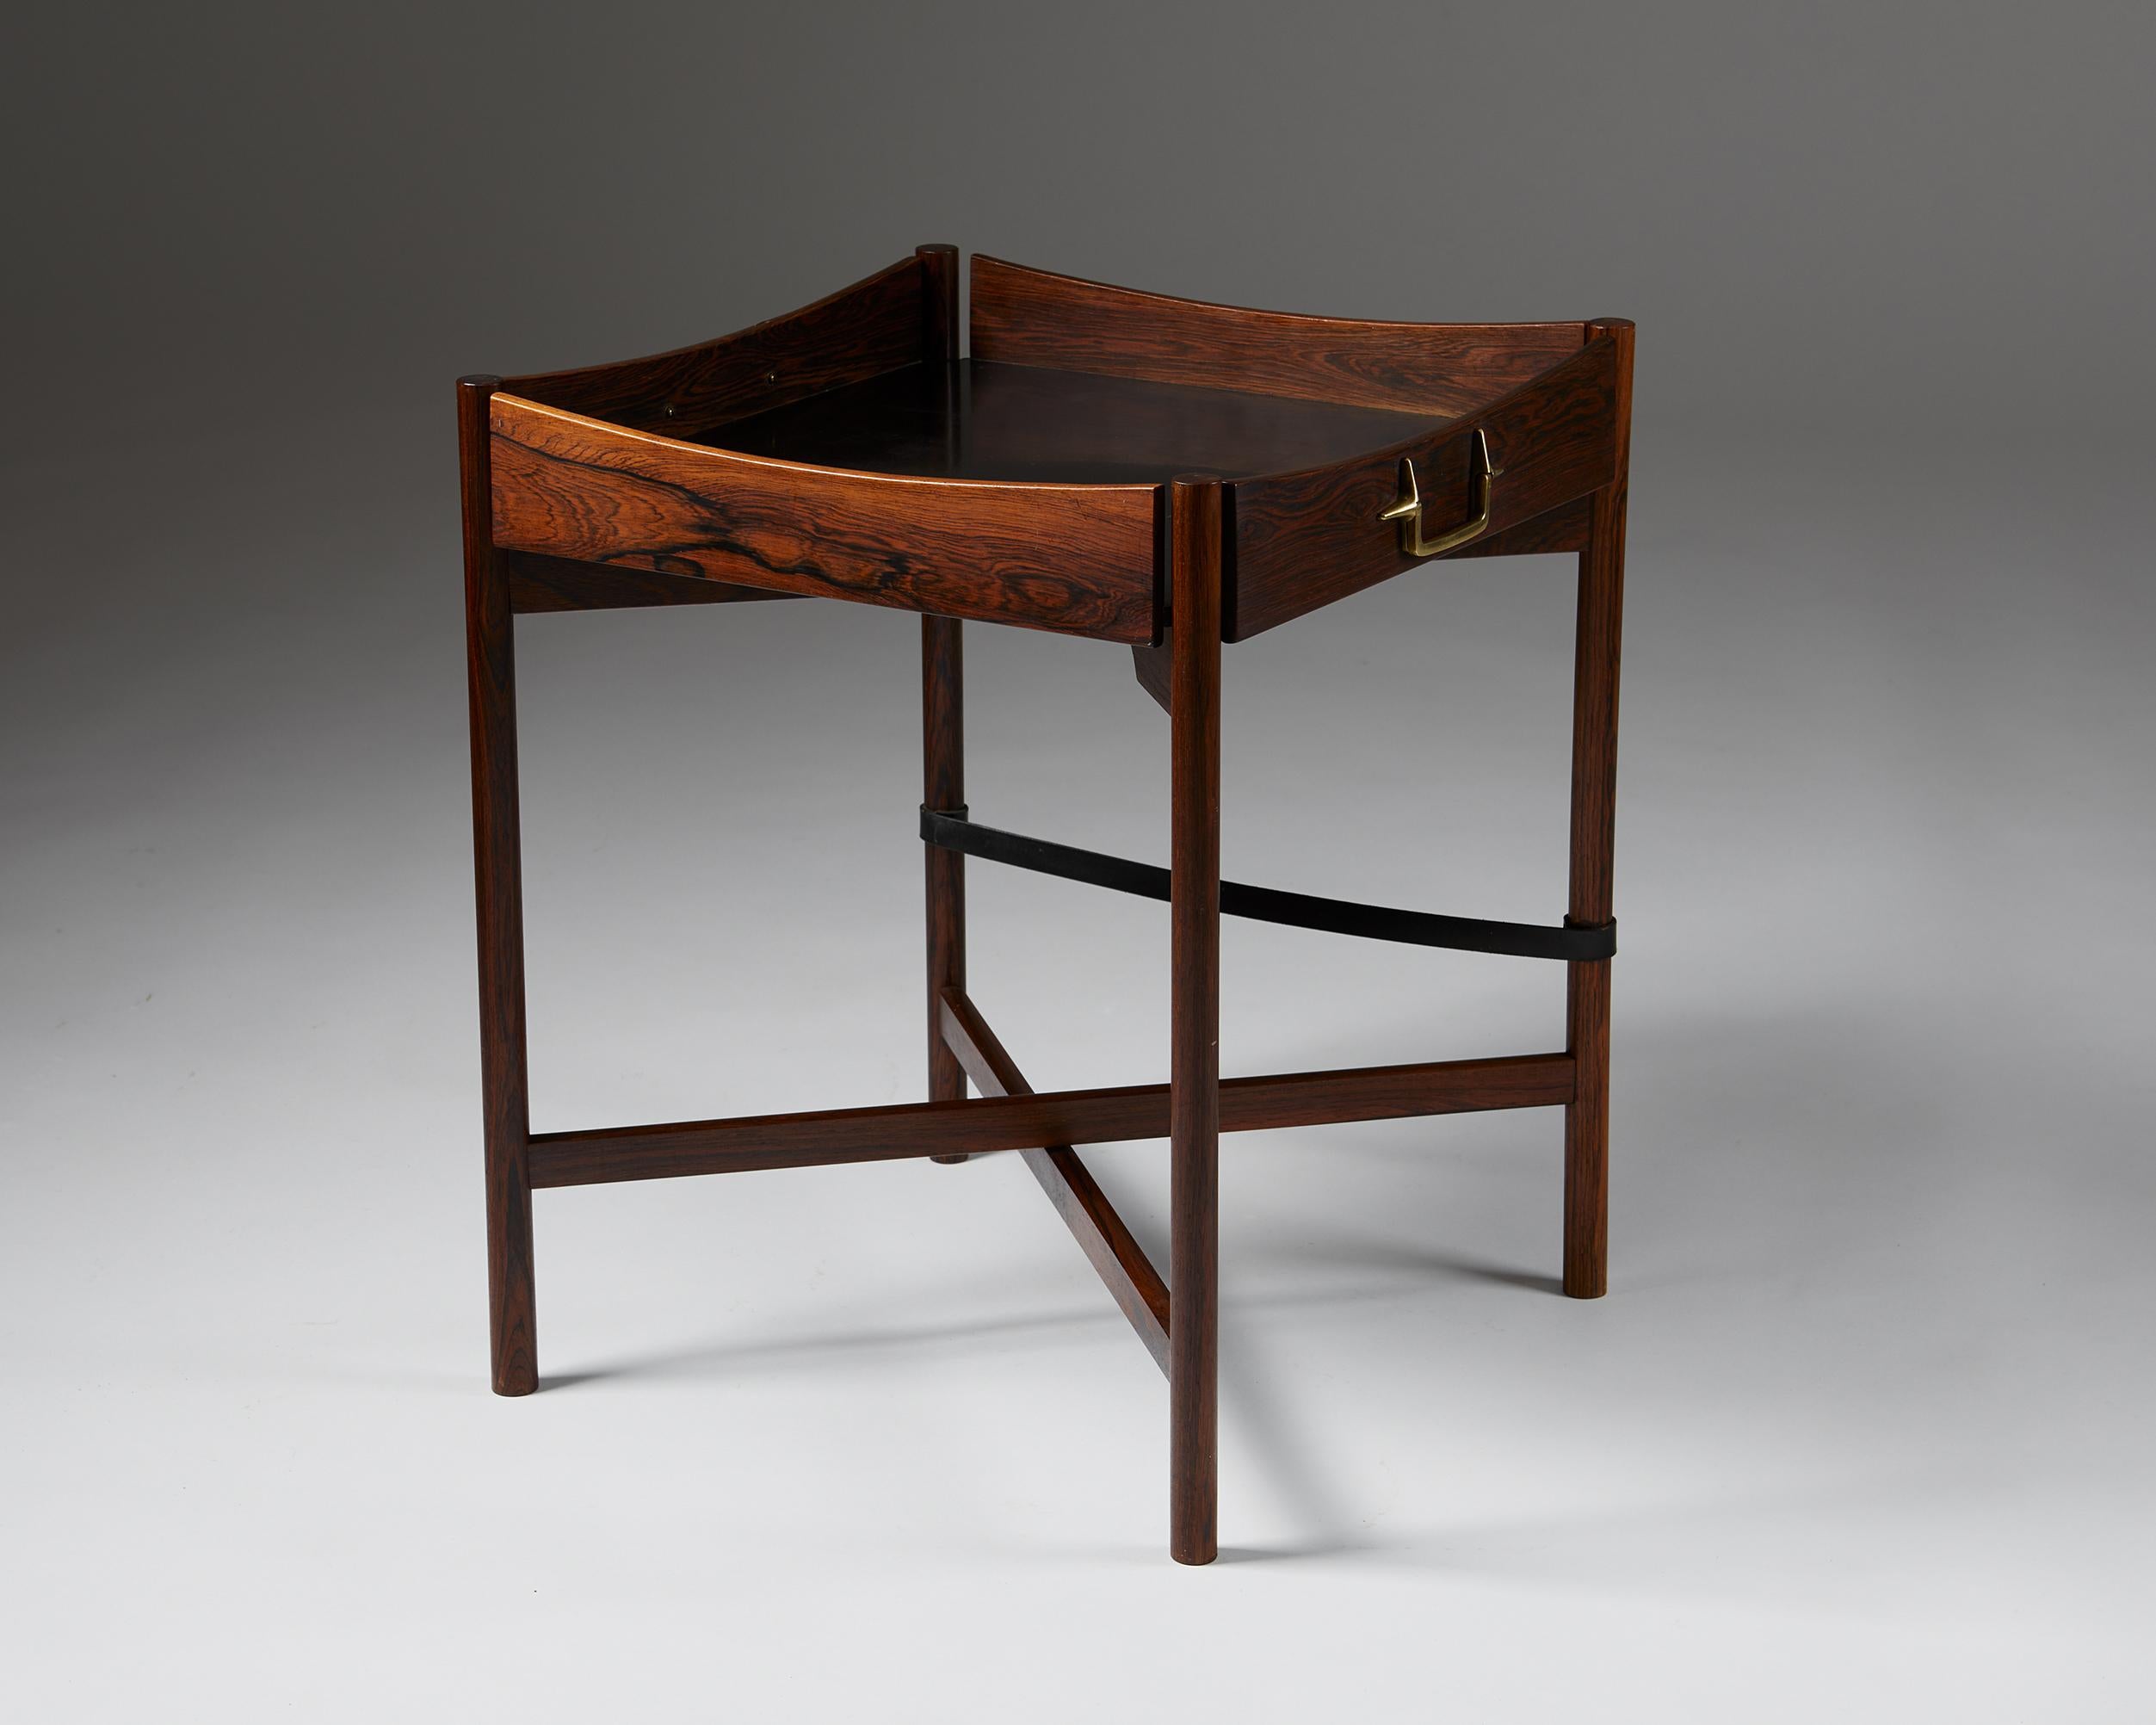 Tray table designed by Mogens Lysell,
Denmark, 1960s.

Brazilian rosewood, brass & black formica.

This Brazilian rosewood tray table was designed by the Danish designer Mogens Lysell in the 1960s. Even today, rosewood is considered to be both